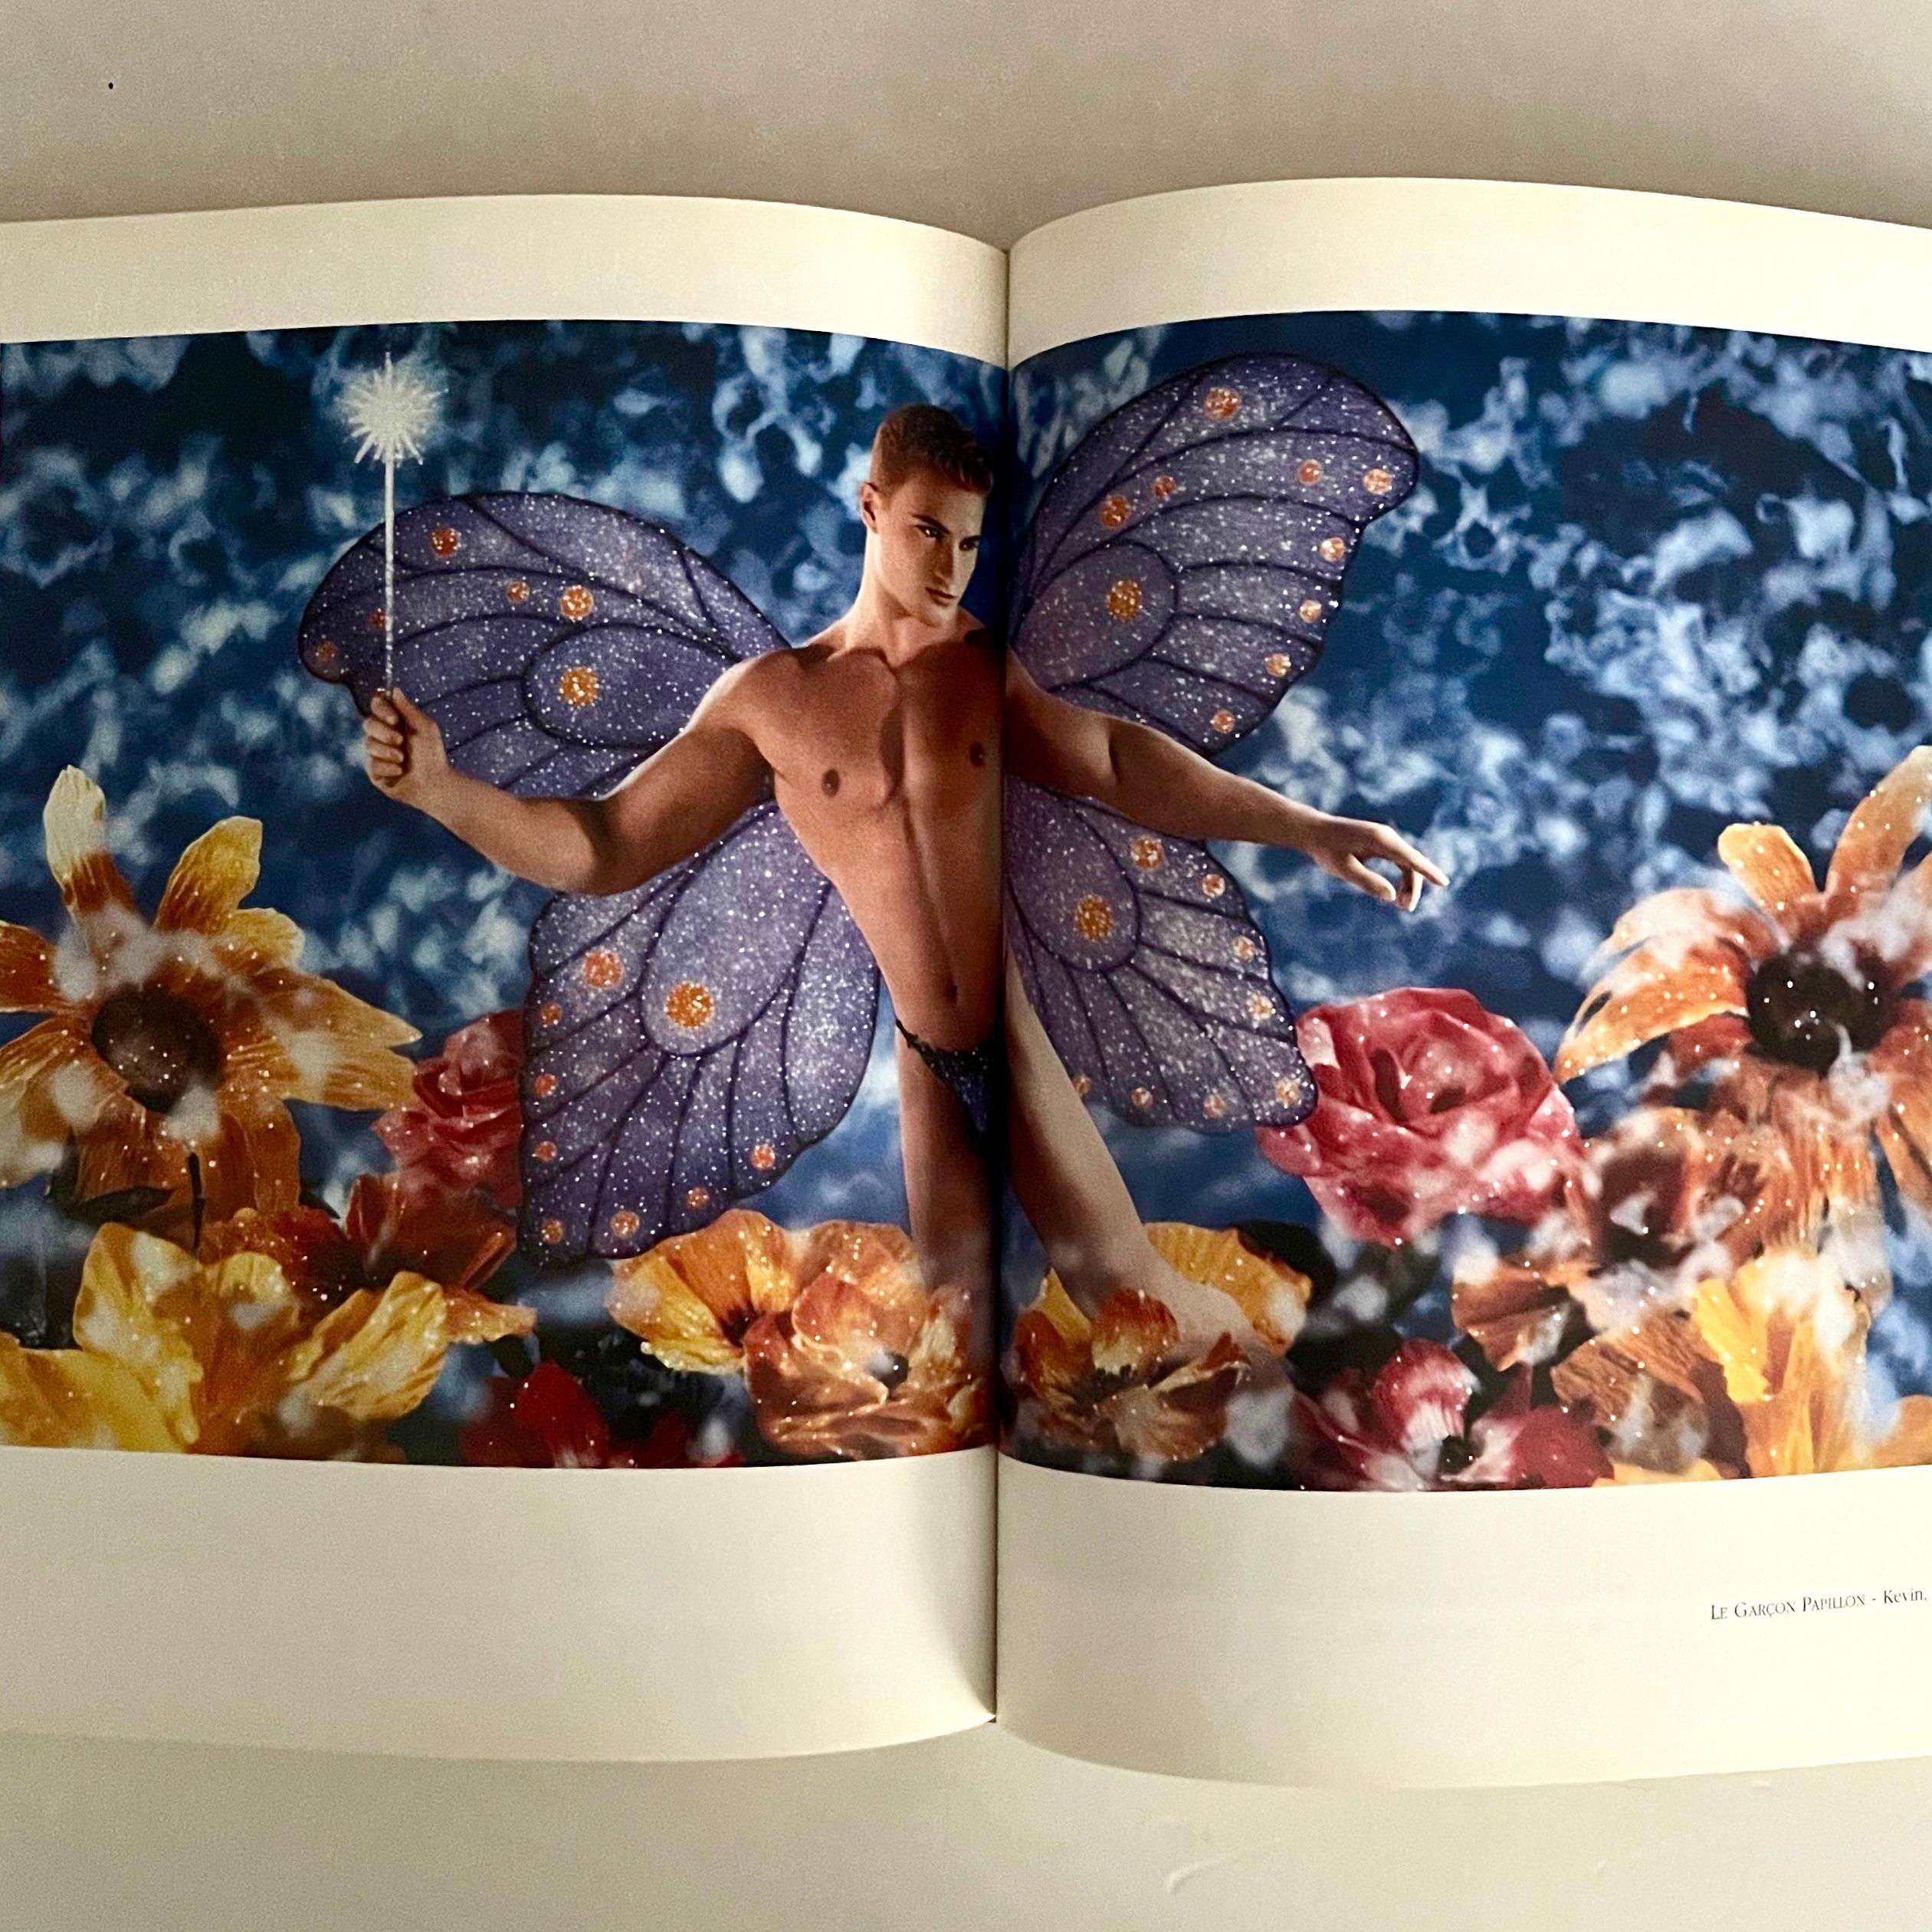 Post-Modern Pierre et Gilles, The Complete Works 1976-1996, 1st Edition 